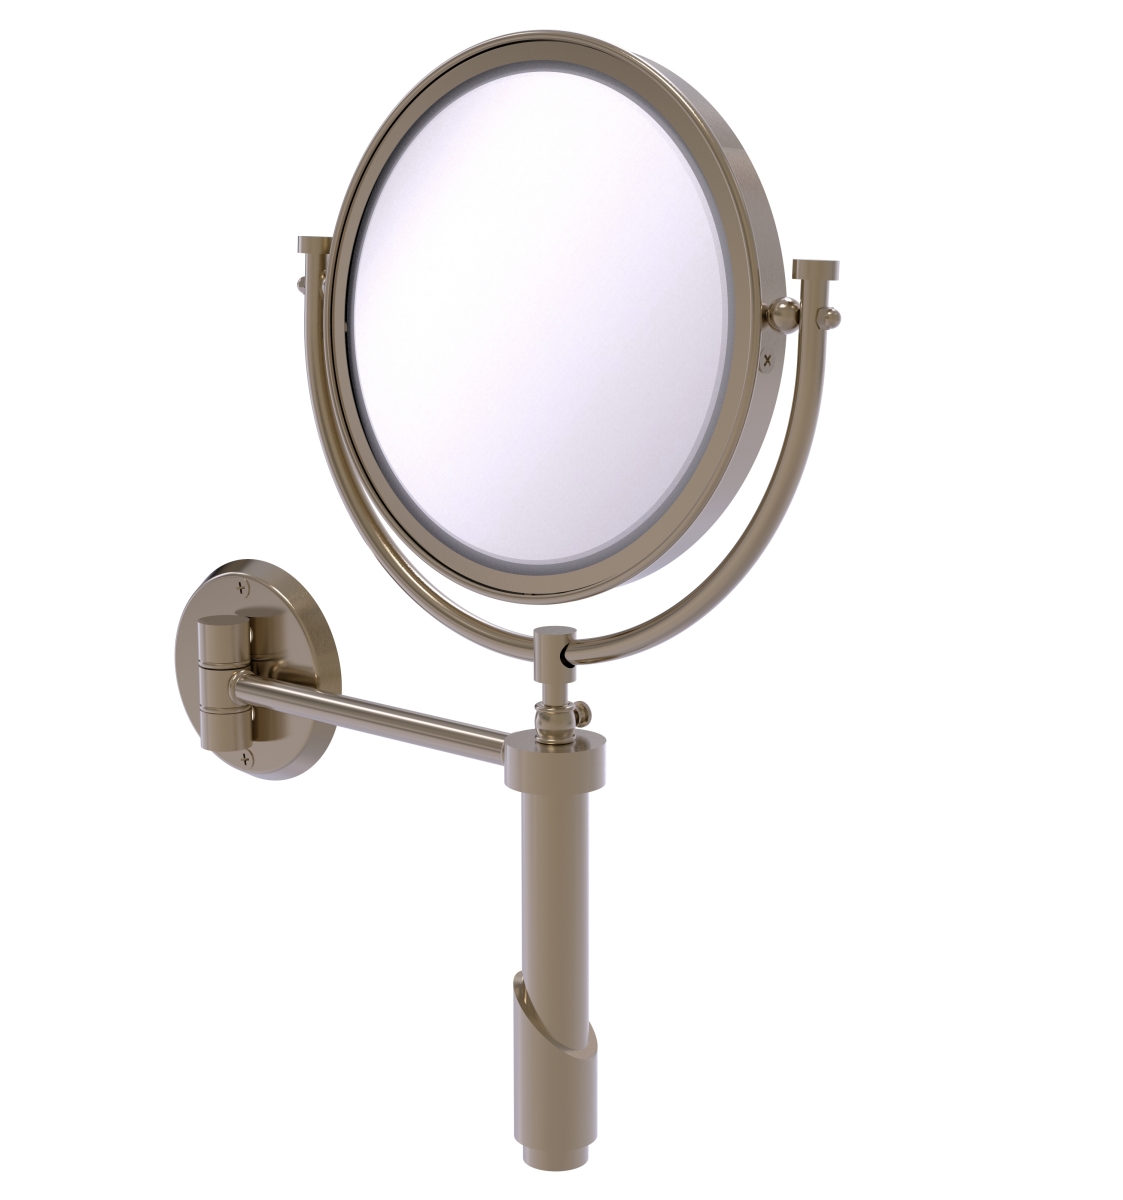 TRM-8-2X-PEW 8 in. dia. Tribecca Collection Wall Mounted Make-Up Mirror with 2X Magnification, Antique Pewter -  Allied Brass, TRM-8/2X-PEW